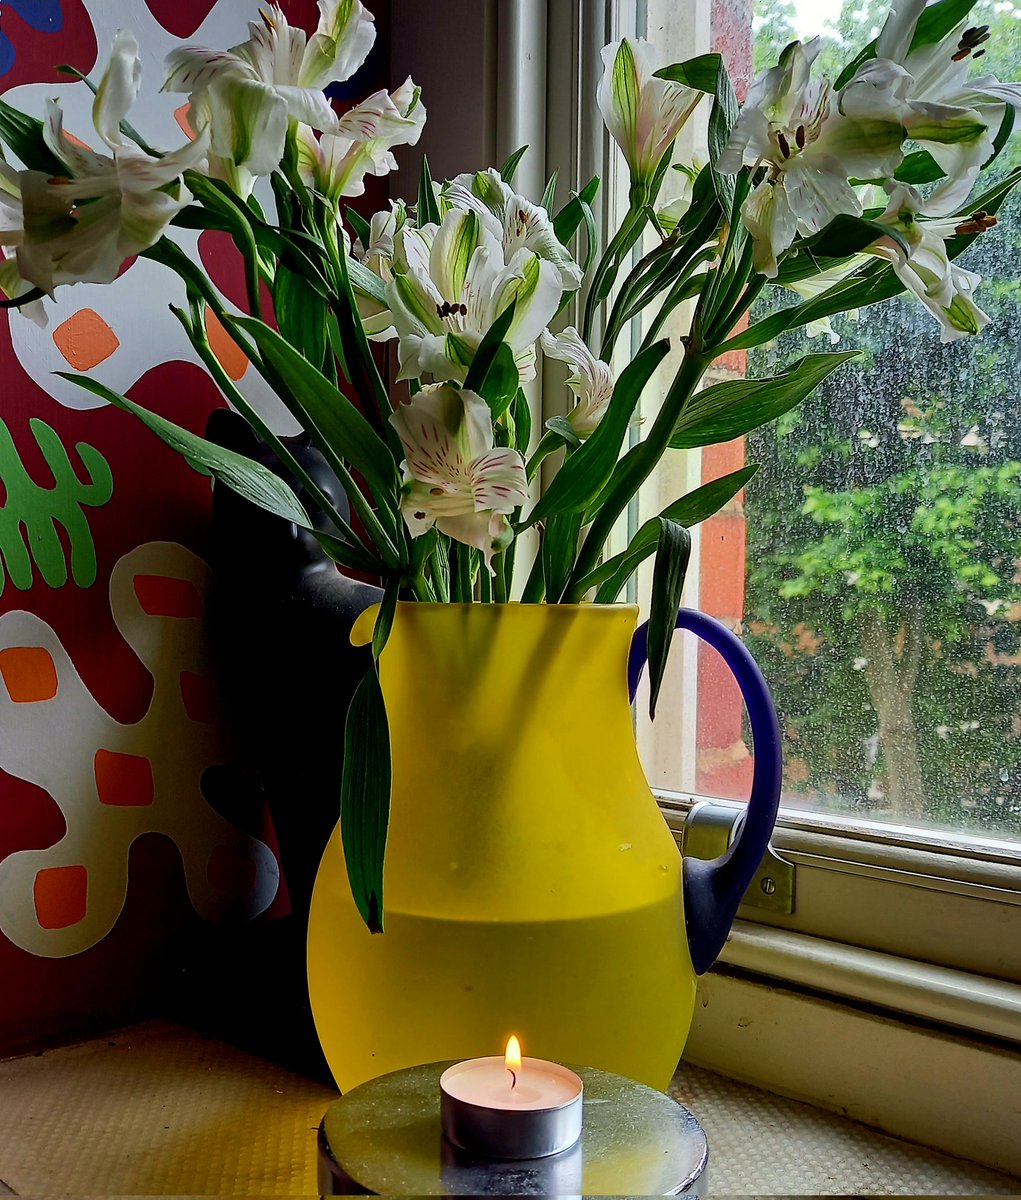 Flowers to remember my partner Ian who died from an #AIDS related illness on this day in 1993 at Patrick House in Hammersmith. Gone but not forgotten. #hivaids #whatisrememberedlives @theaidsmemorial